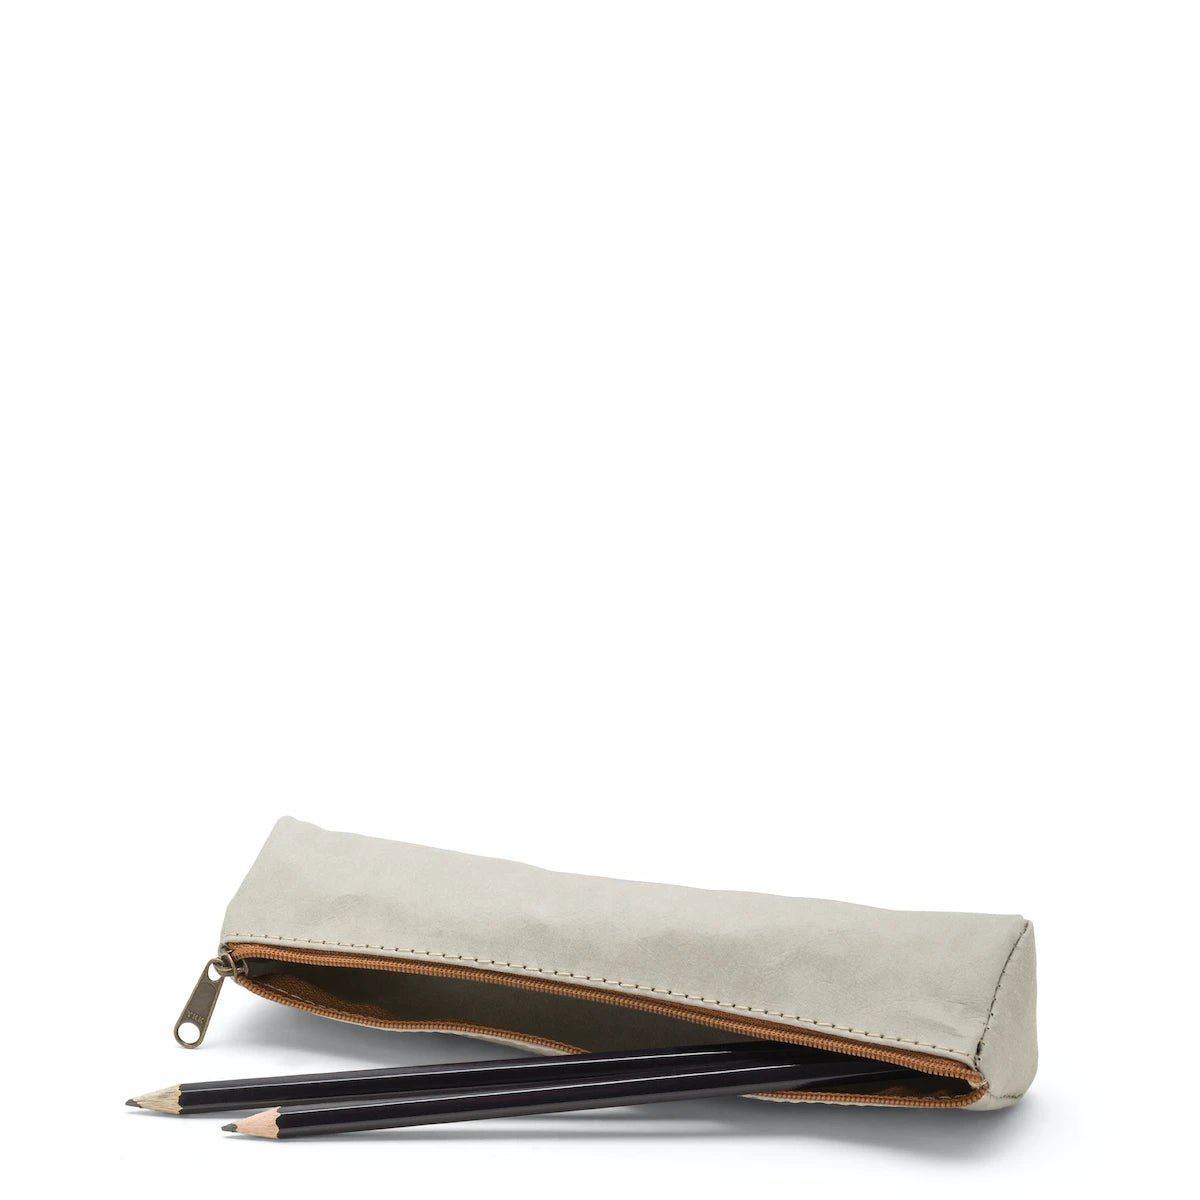 A washable paper pencil case is shown on its side with two pencils spilling out. The pencil case is pale grey in colour and has a metal zip closure.